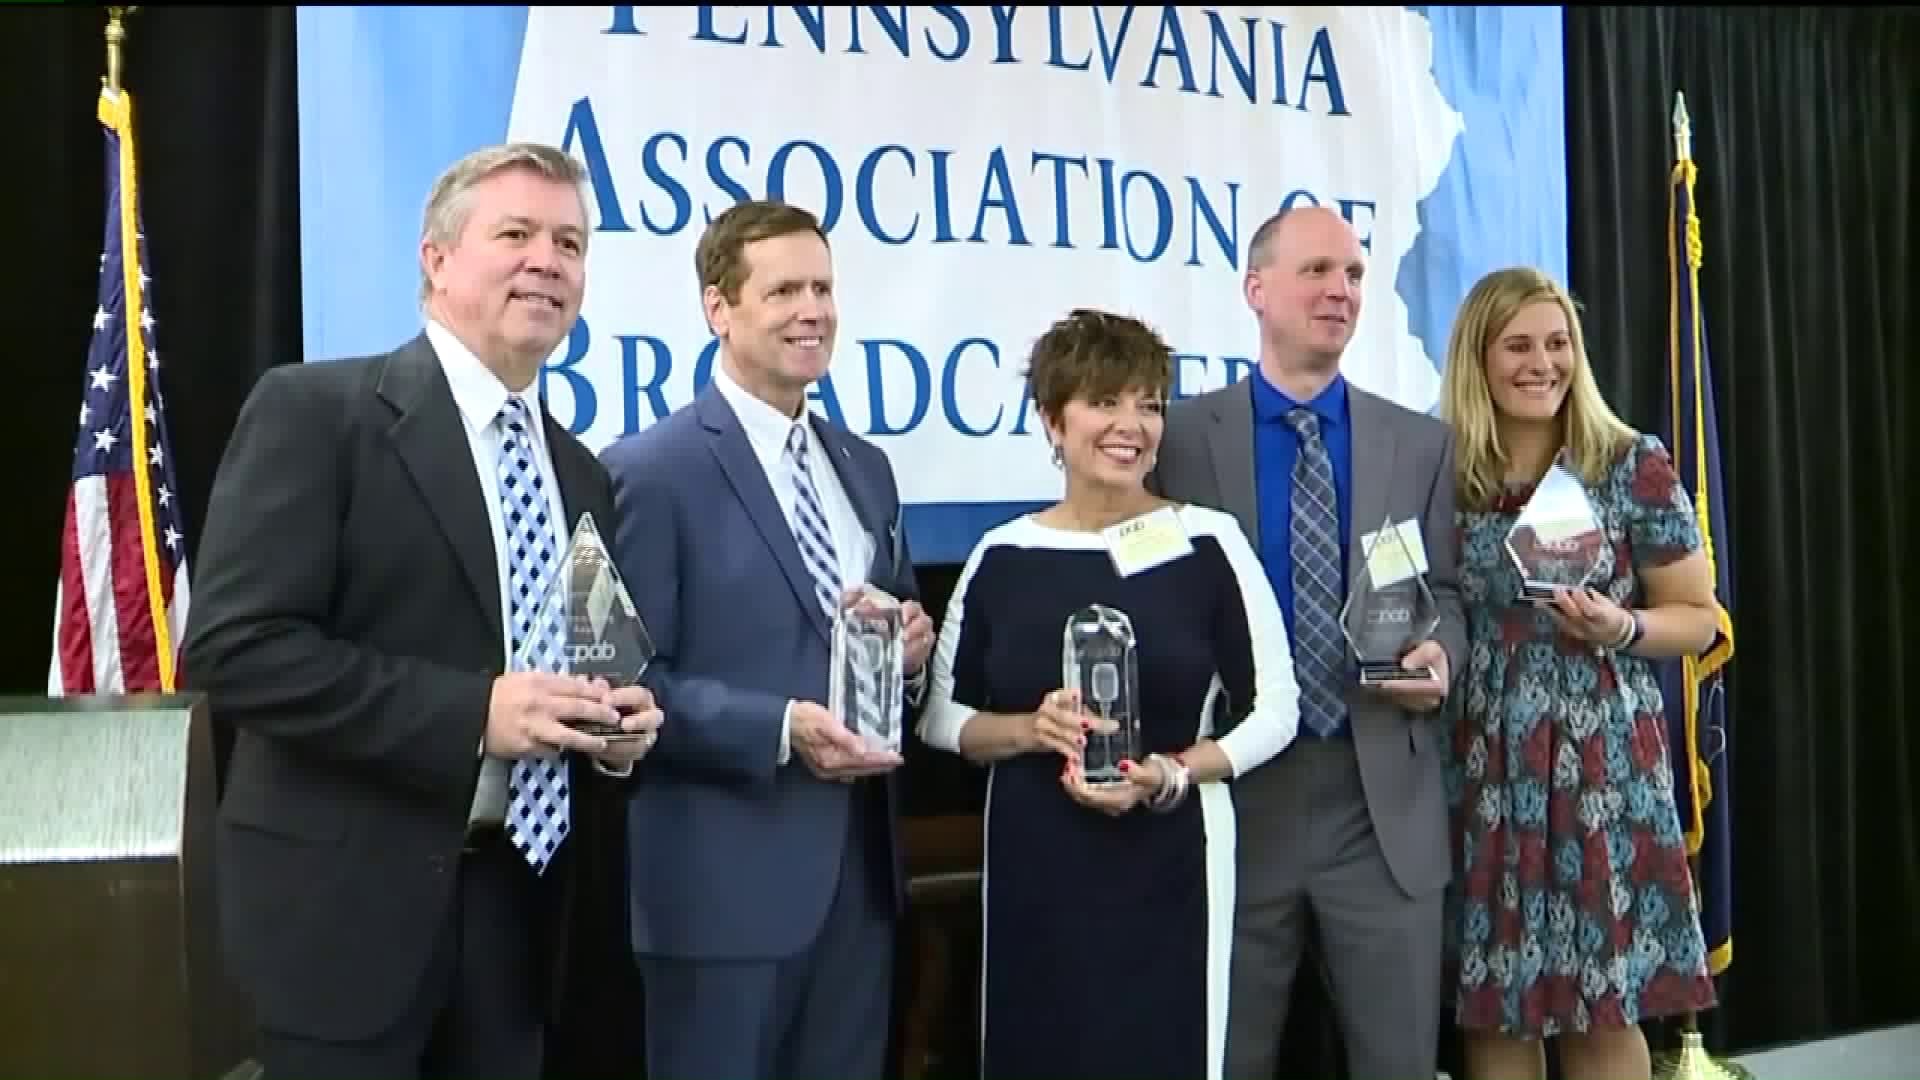 Newswatch 16 Honored by Pennsylvania Association of Broadcasters